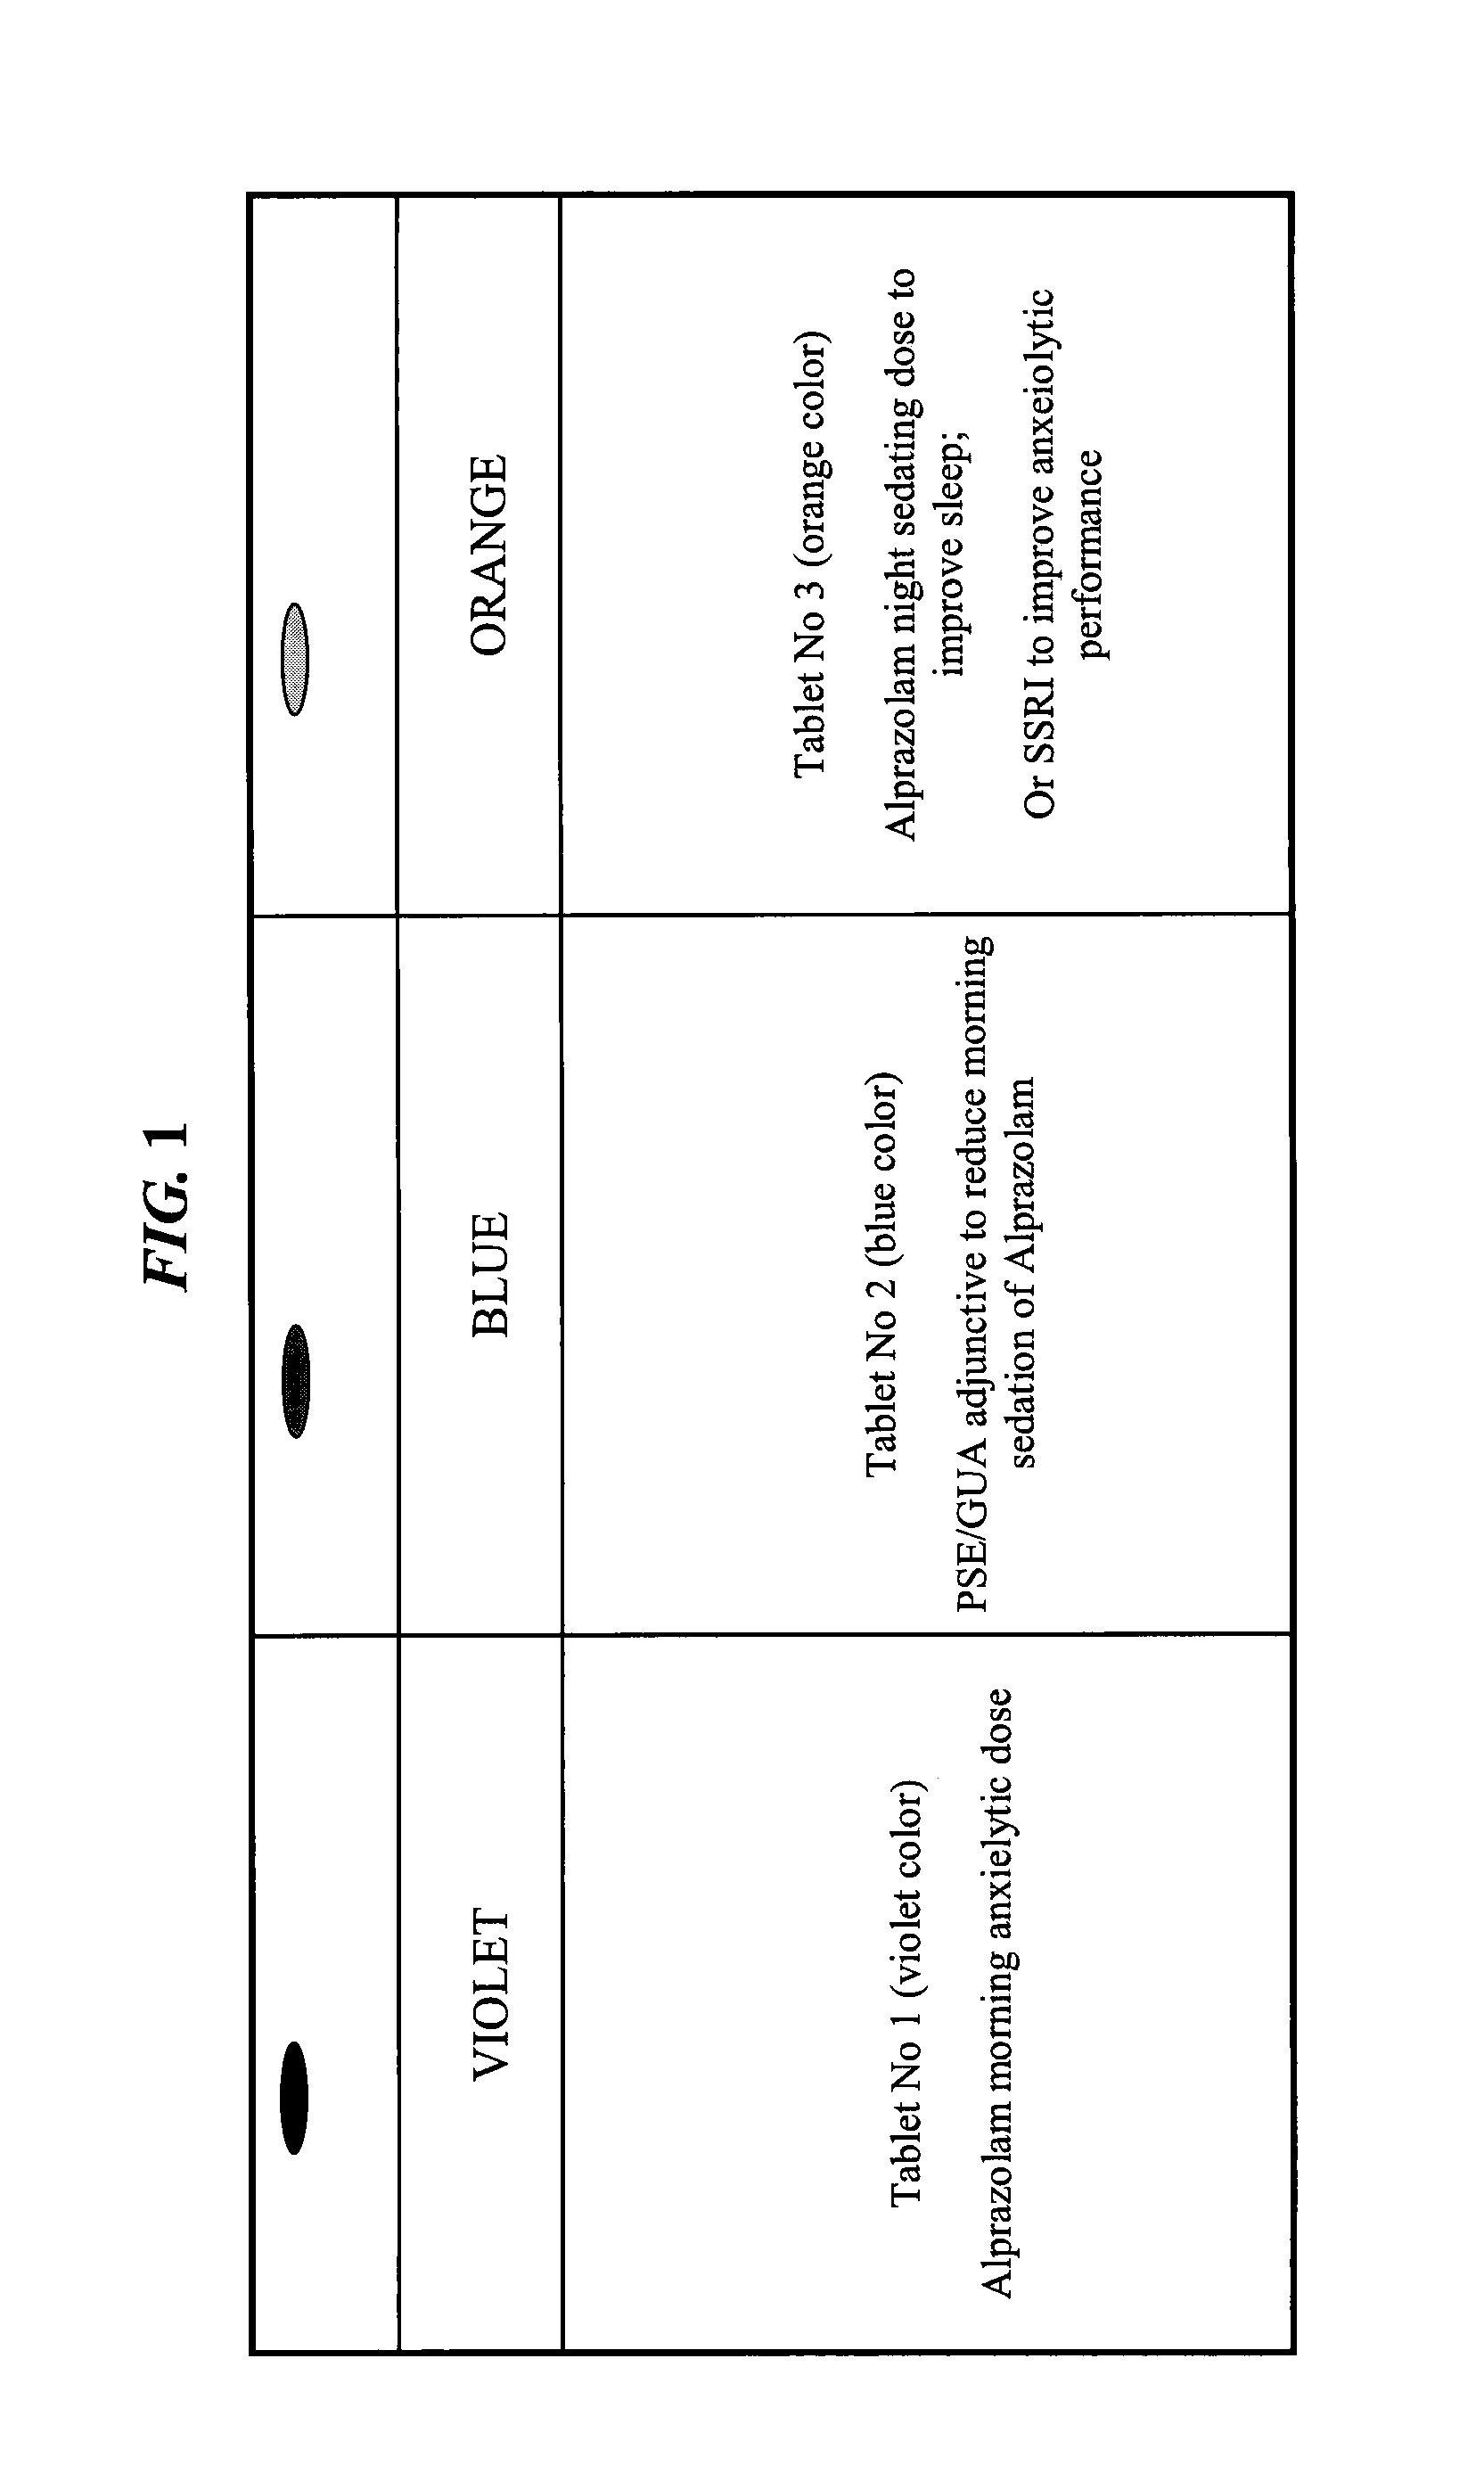 CNS pharmaceutical compositions and methods of use